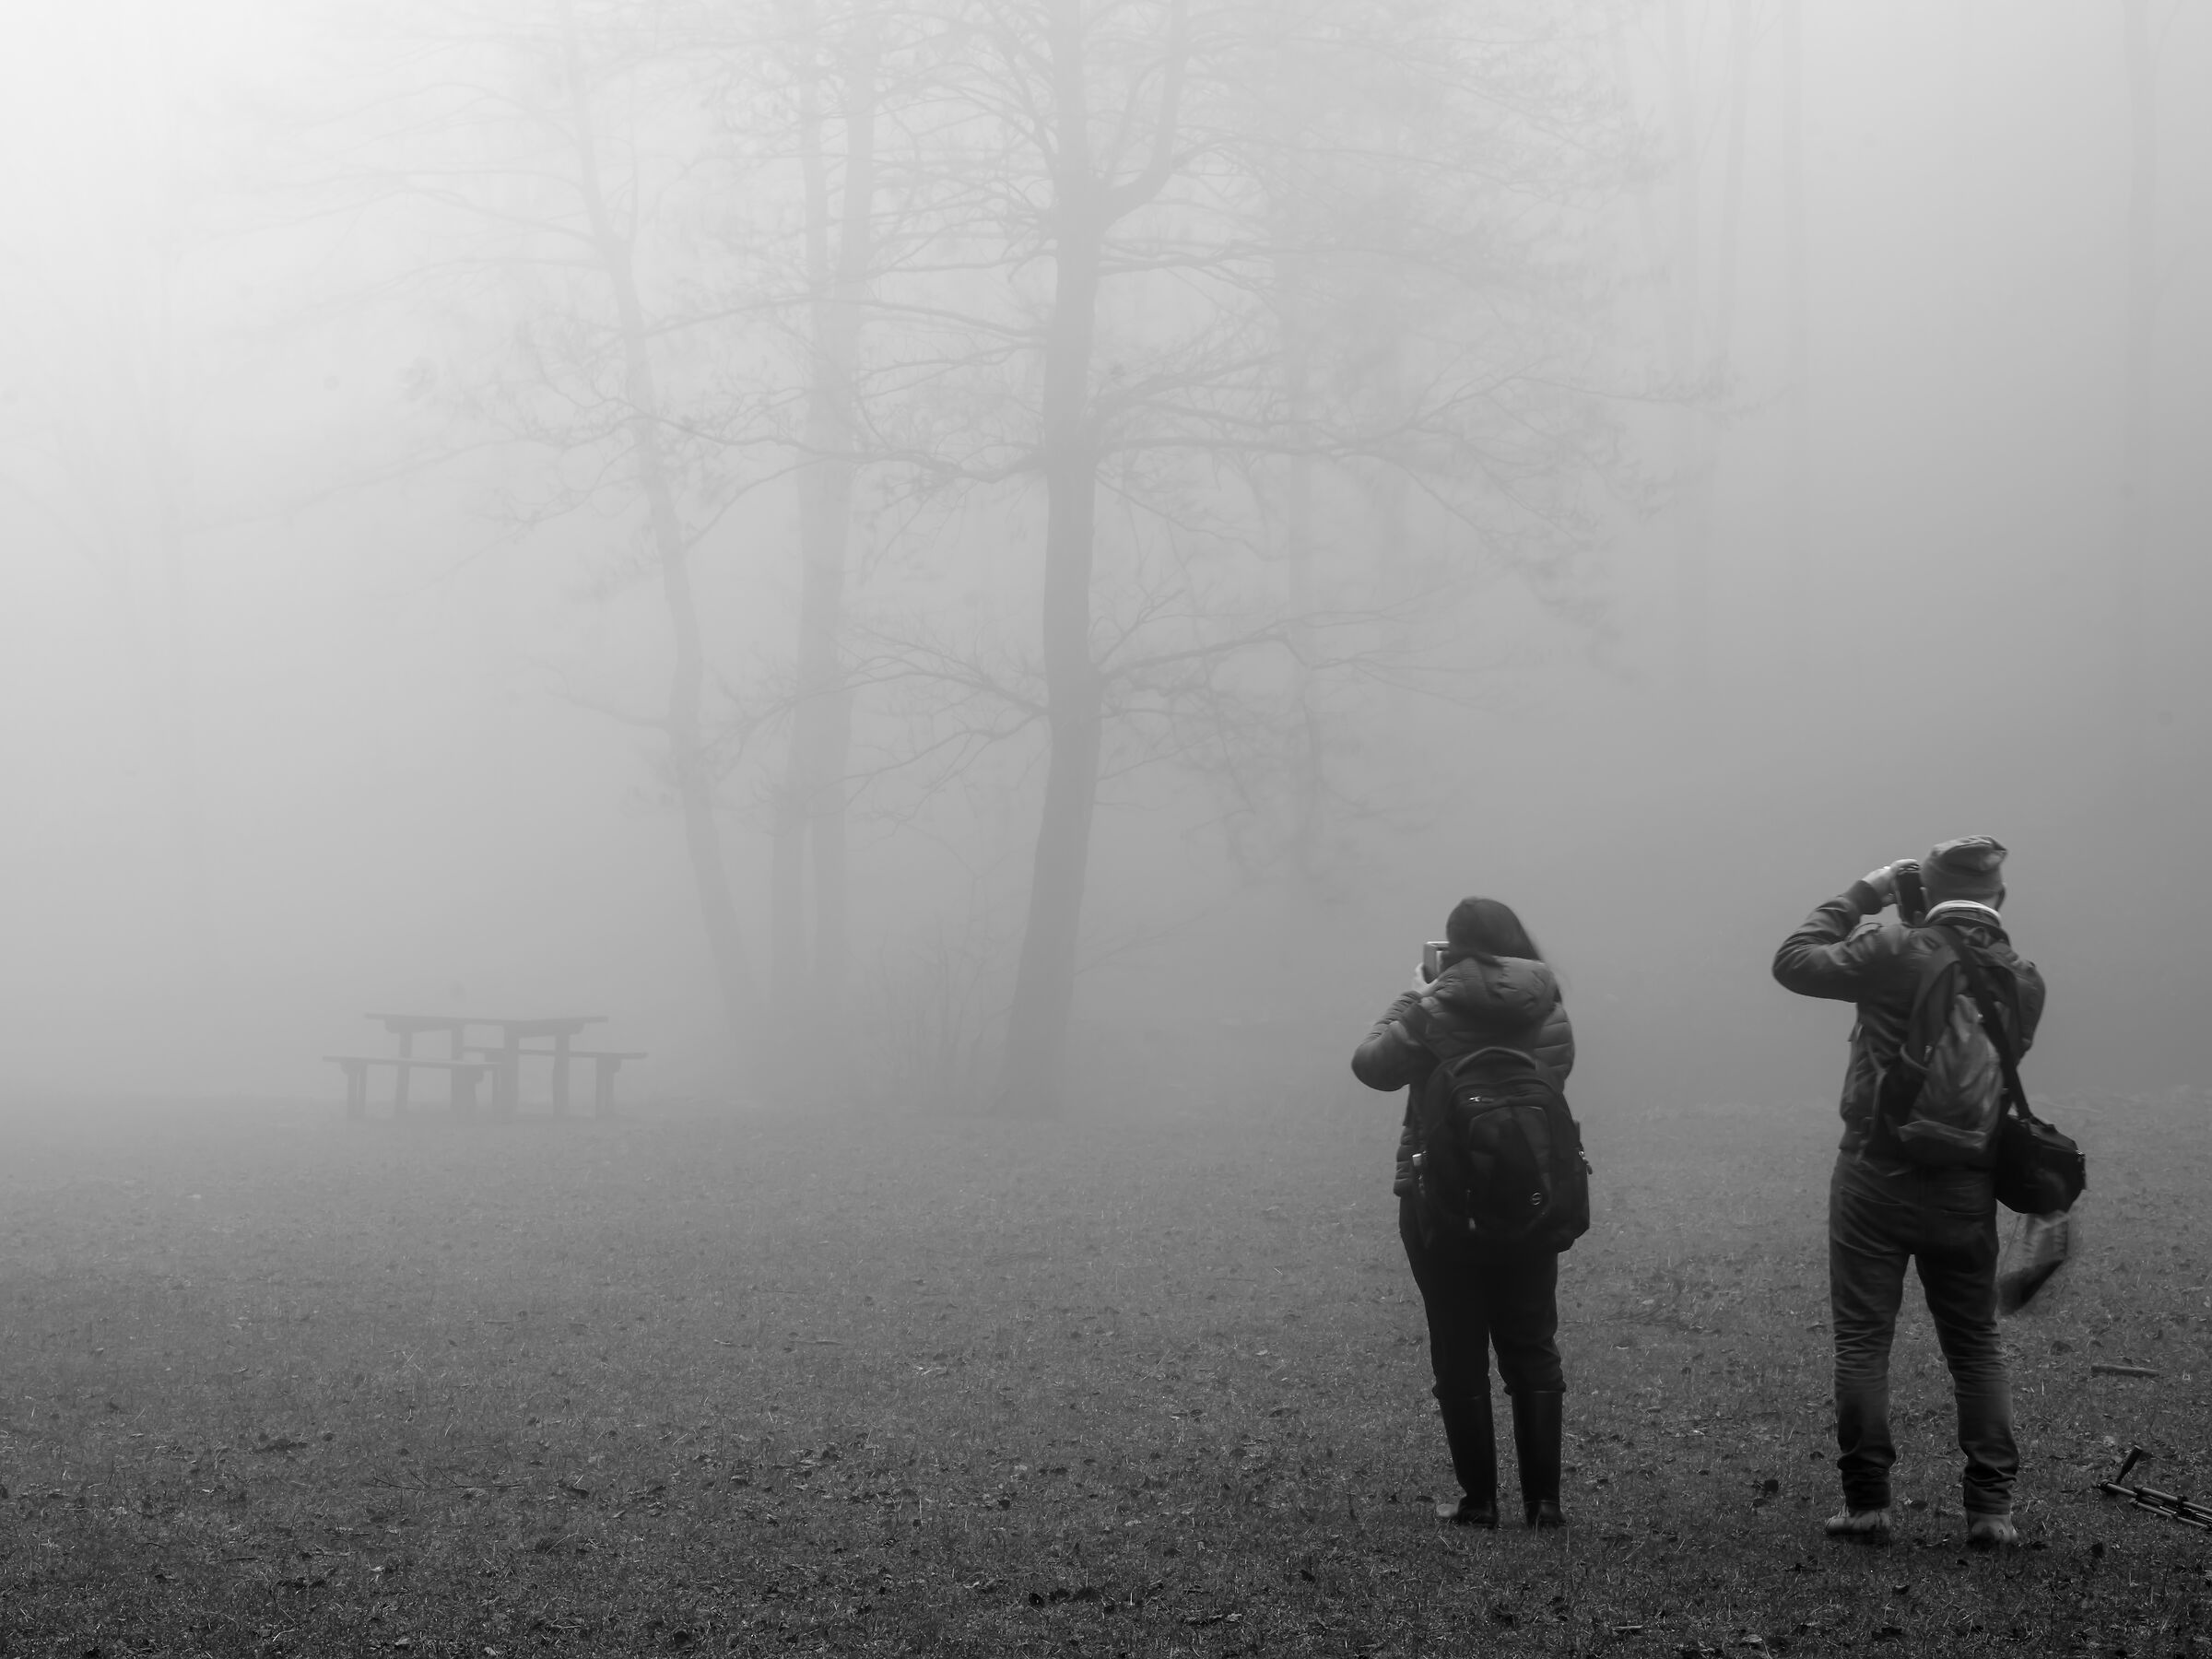 Shooting in the fog...